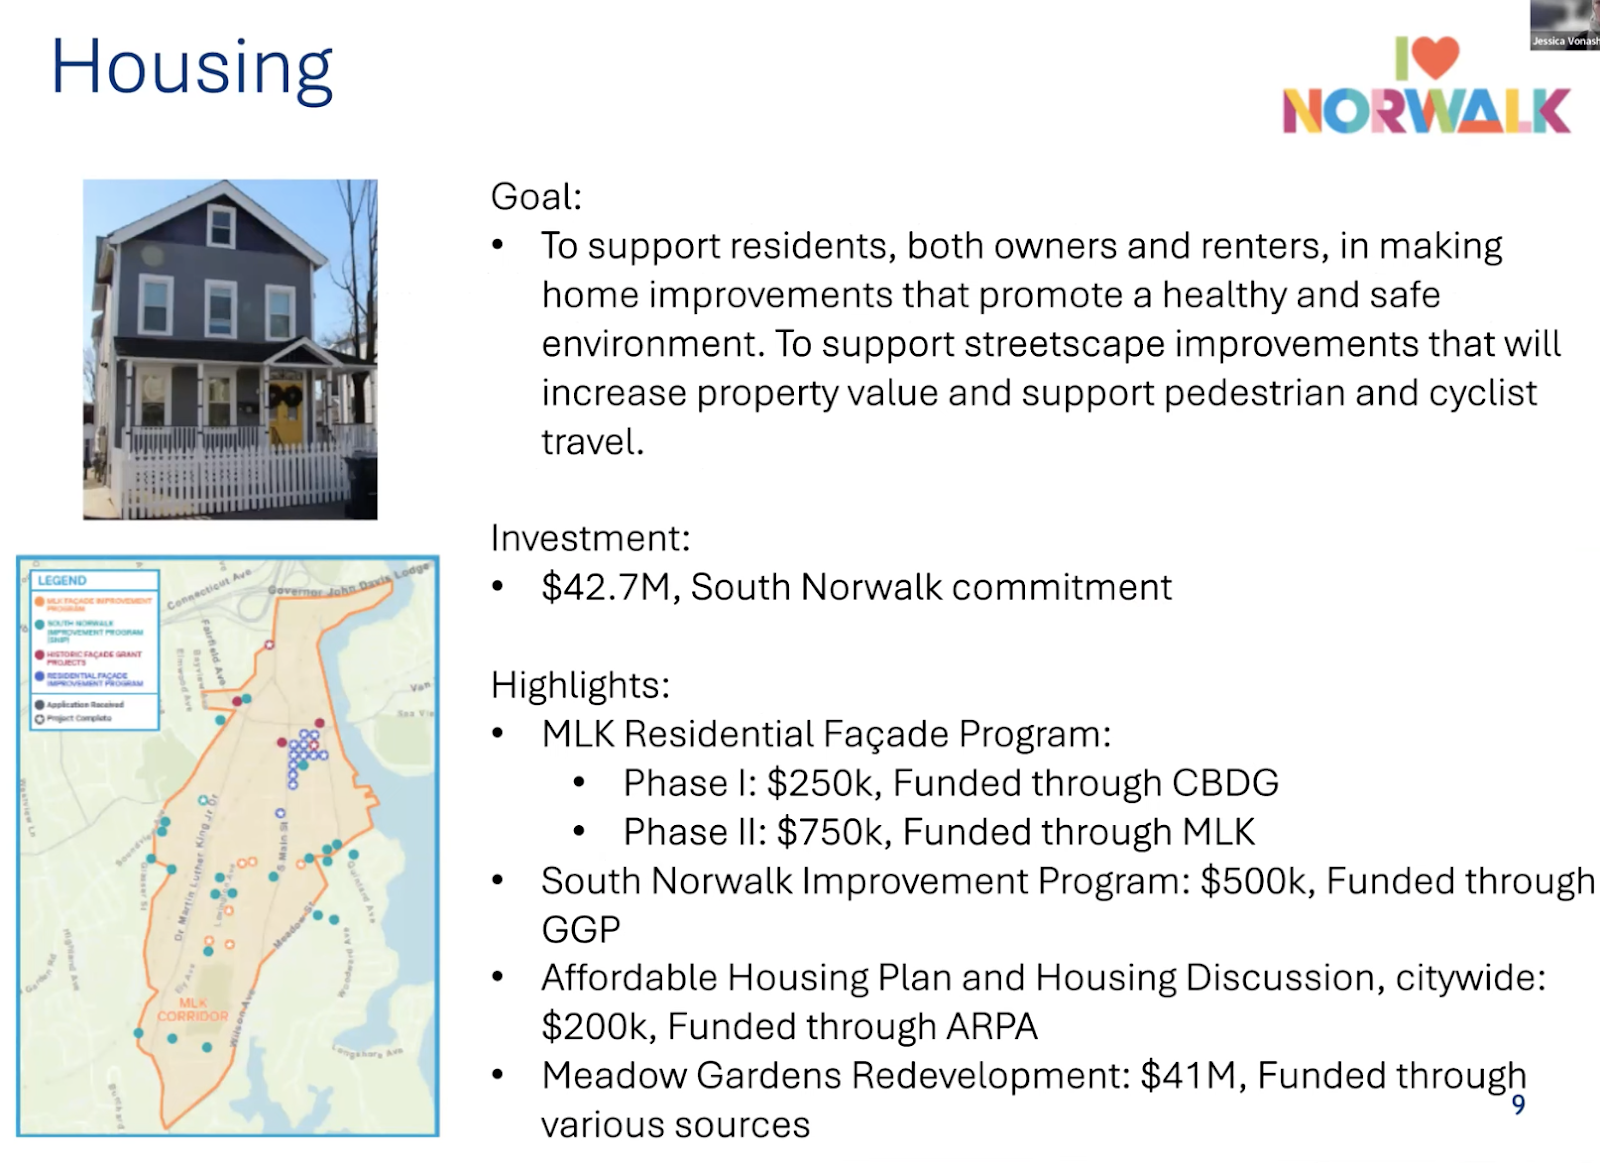 A look at the housing projects funded by Norwalk